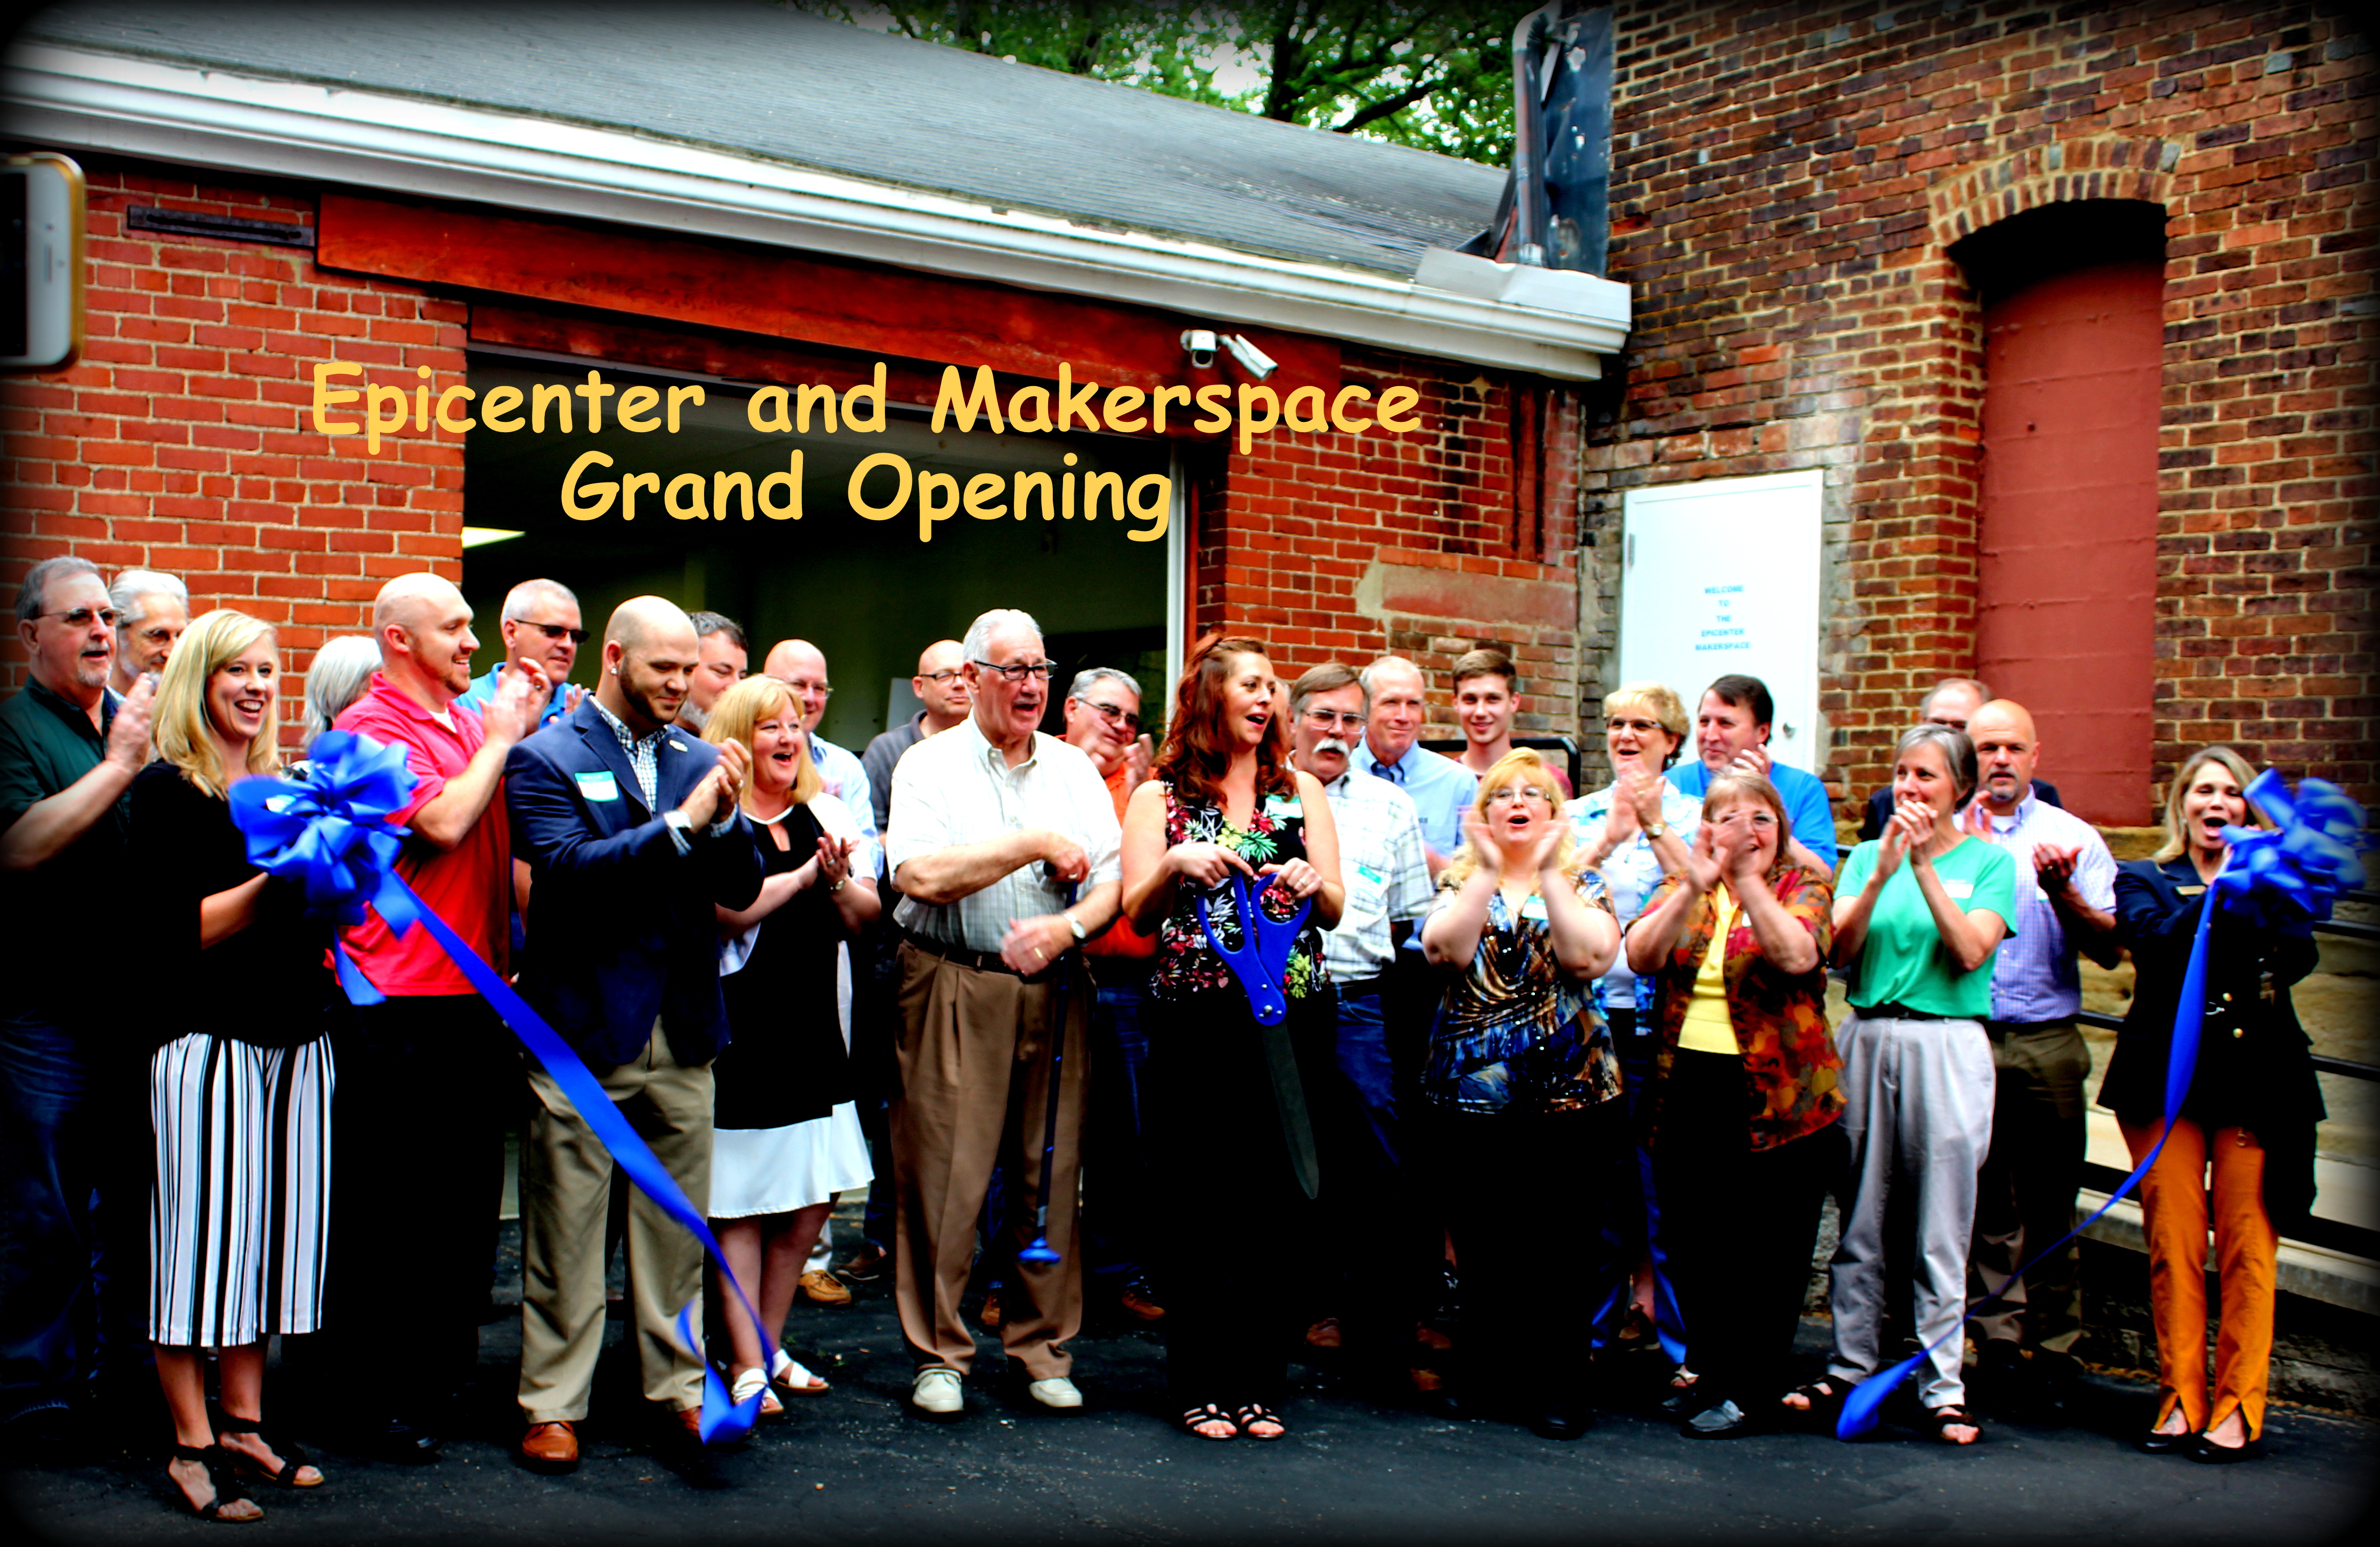 GRAND OPENING EPICENTER AND MAKERSPACE MARIETTA OHIO May 16 2018